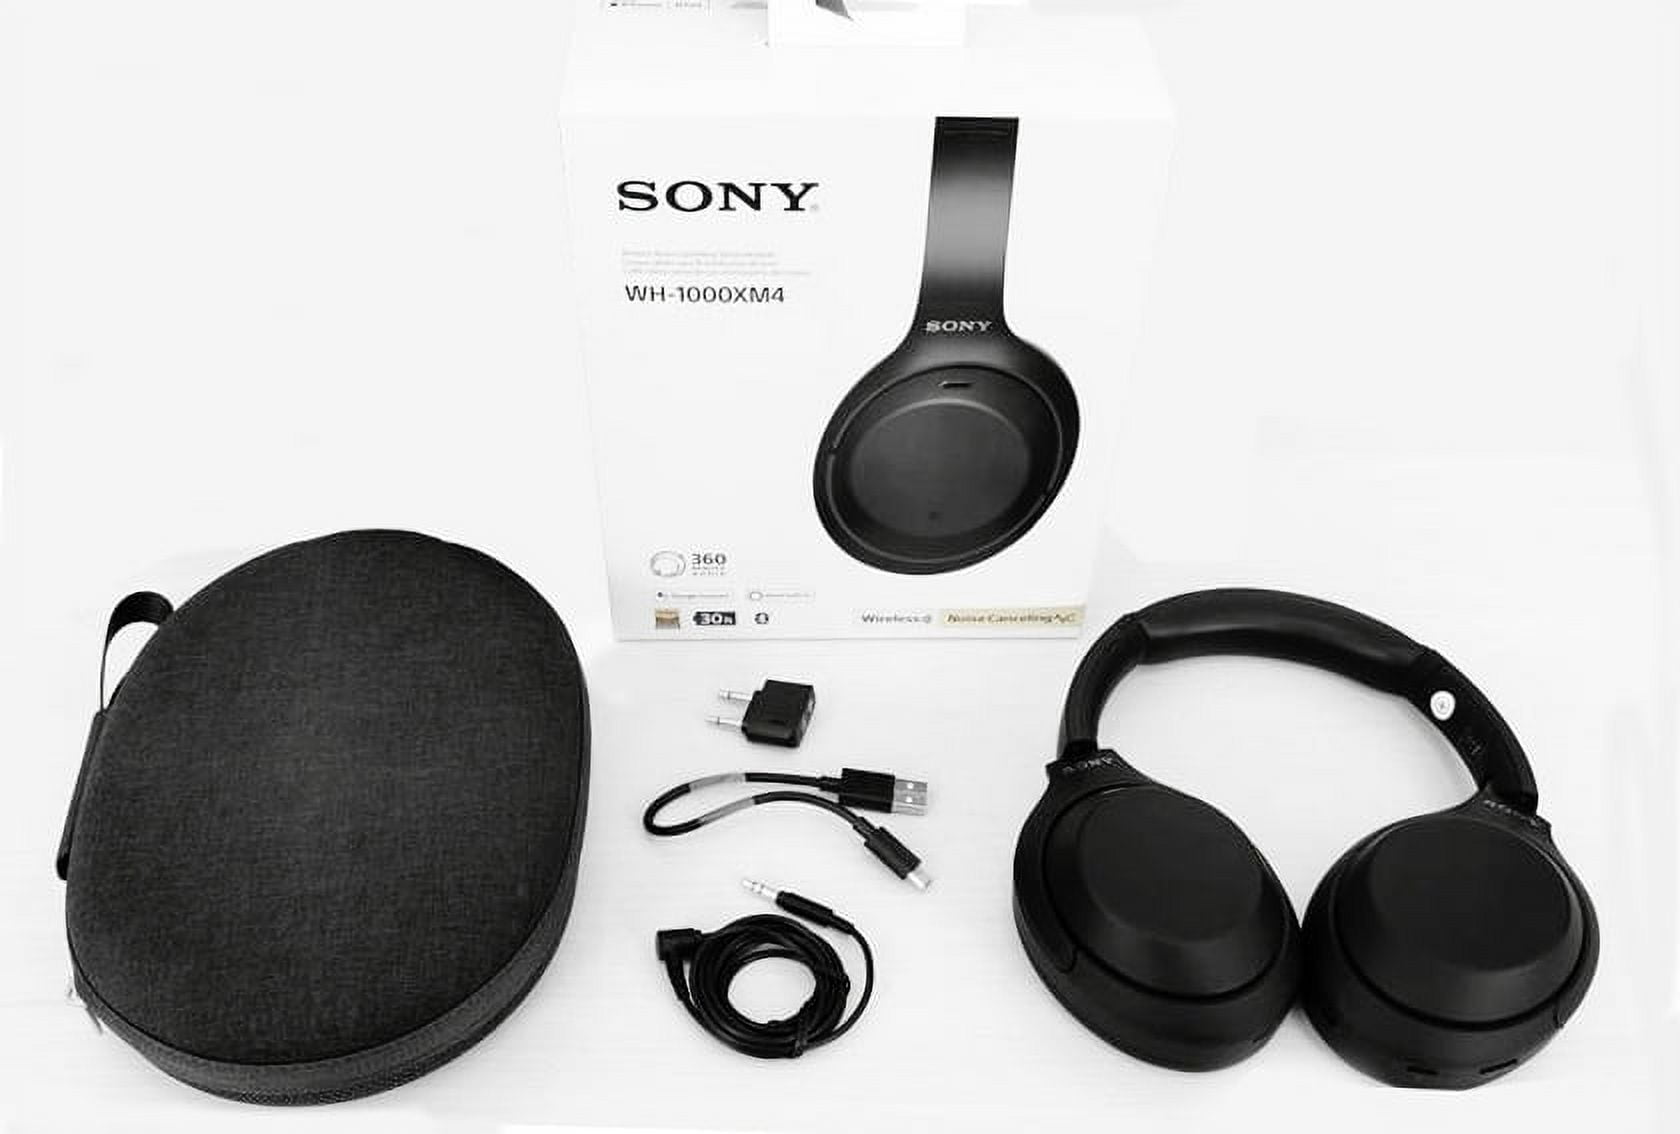 Sony WH-1000XM4 Wireless Noise-Canceling Over-Ear Headphones (Black  WH1000XM4/B) Bundle + Wall Charger with USB Type-C Cable